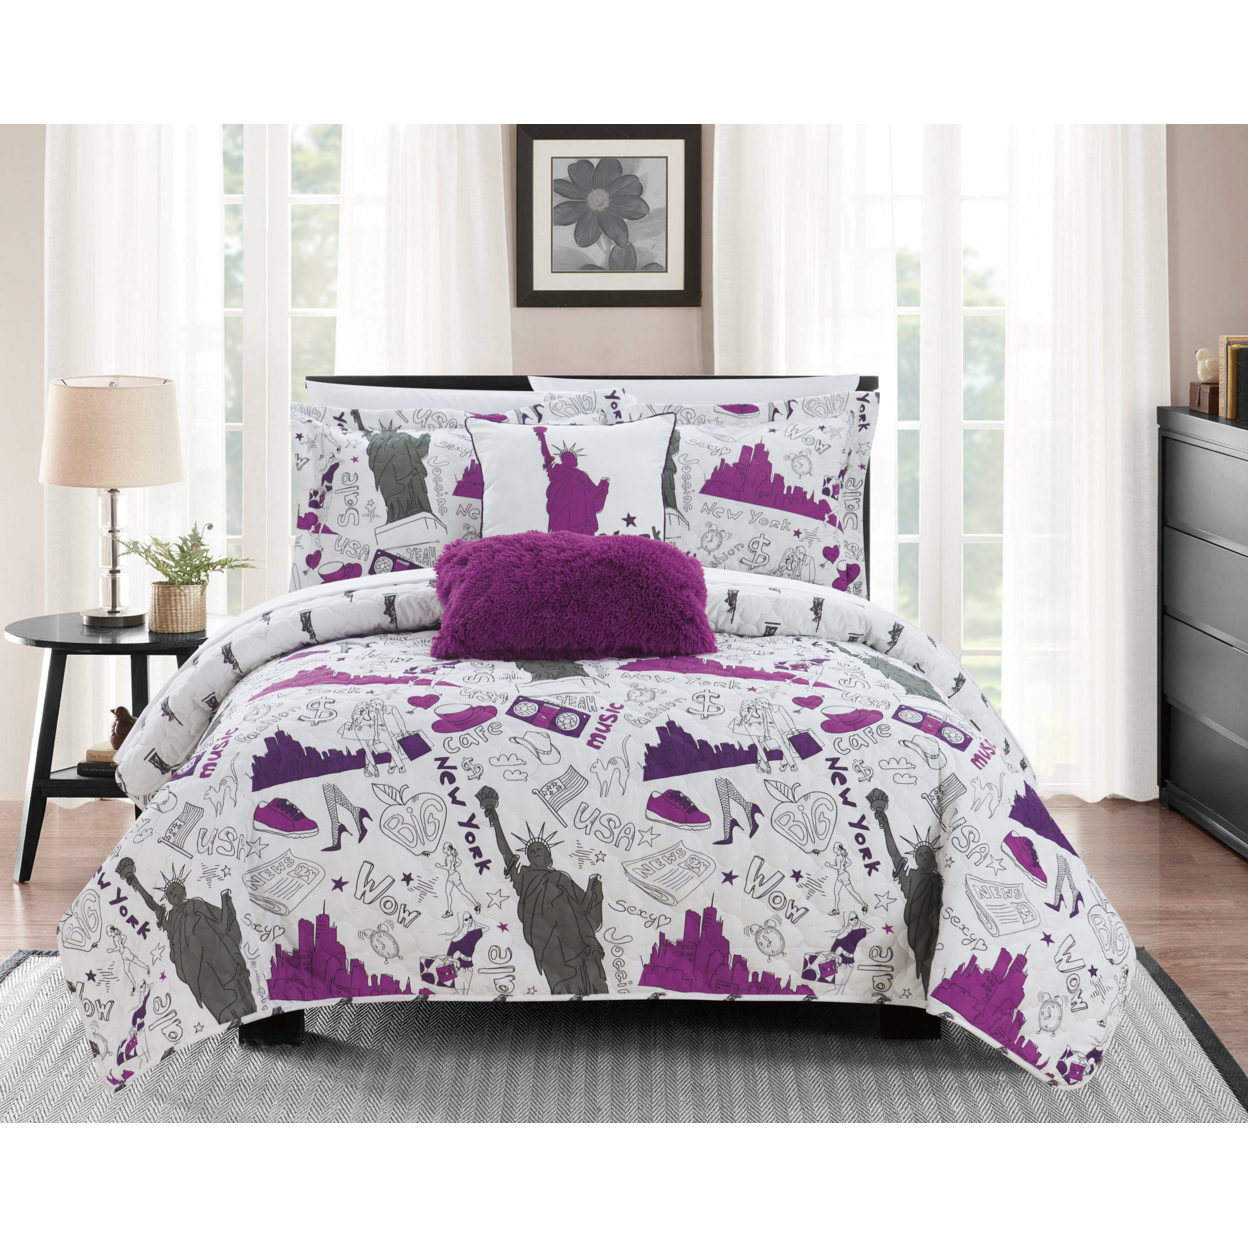 Bay Park 5 Or 4 Piece Reversible Quilt Set Bay Park City Inspired Printed Design Coverlet Bedding - Purple, Queen